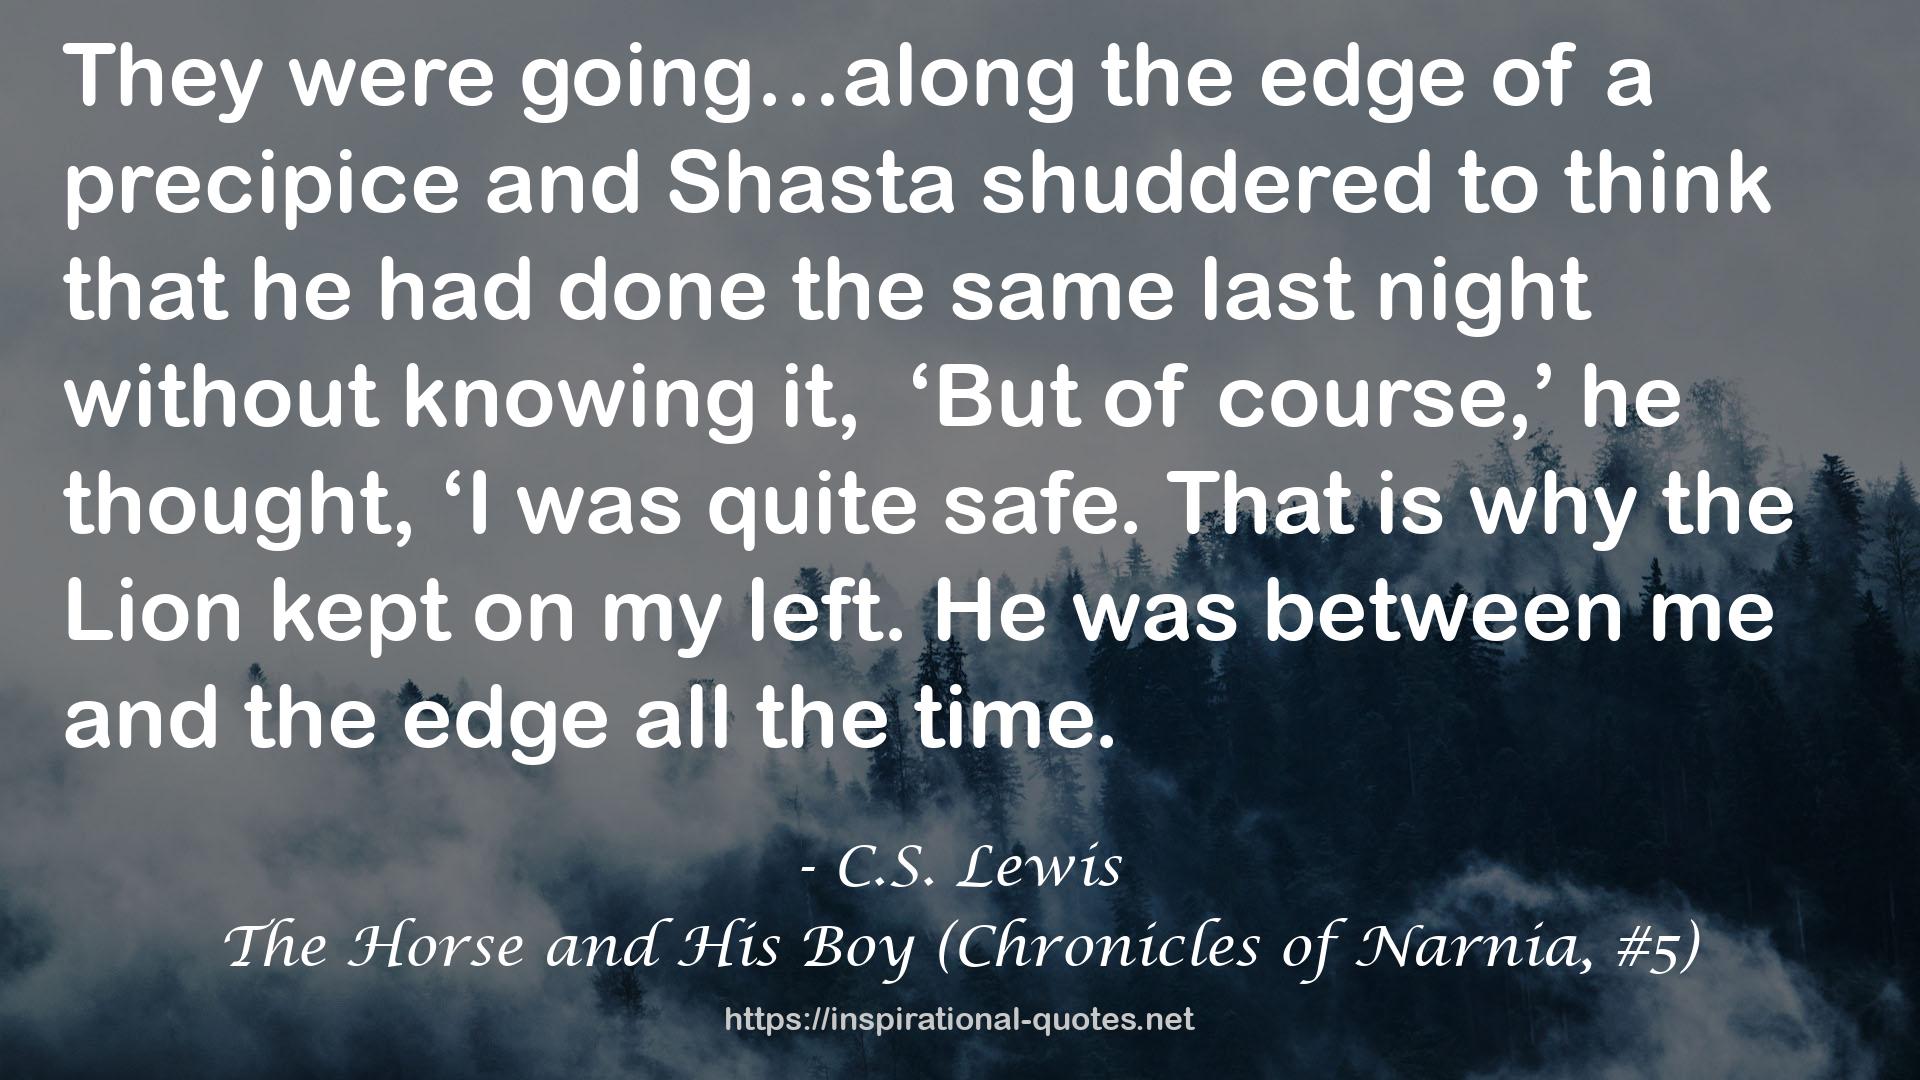 The Horse and His Boy (Chronicles of Narnia, #5) QUOTES